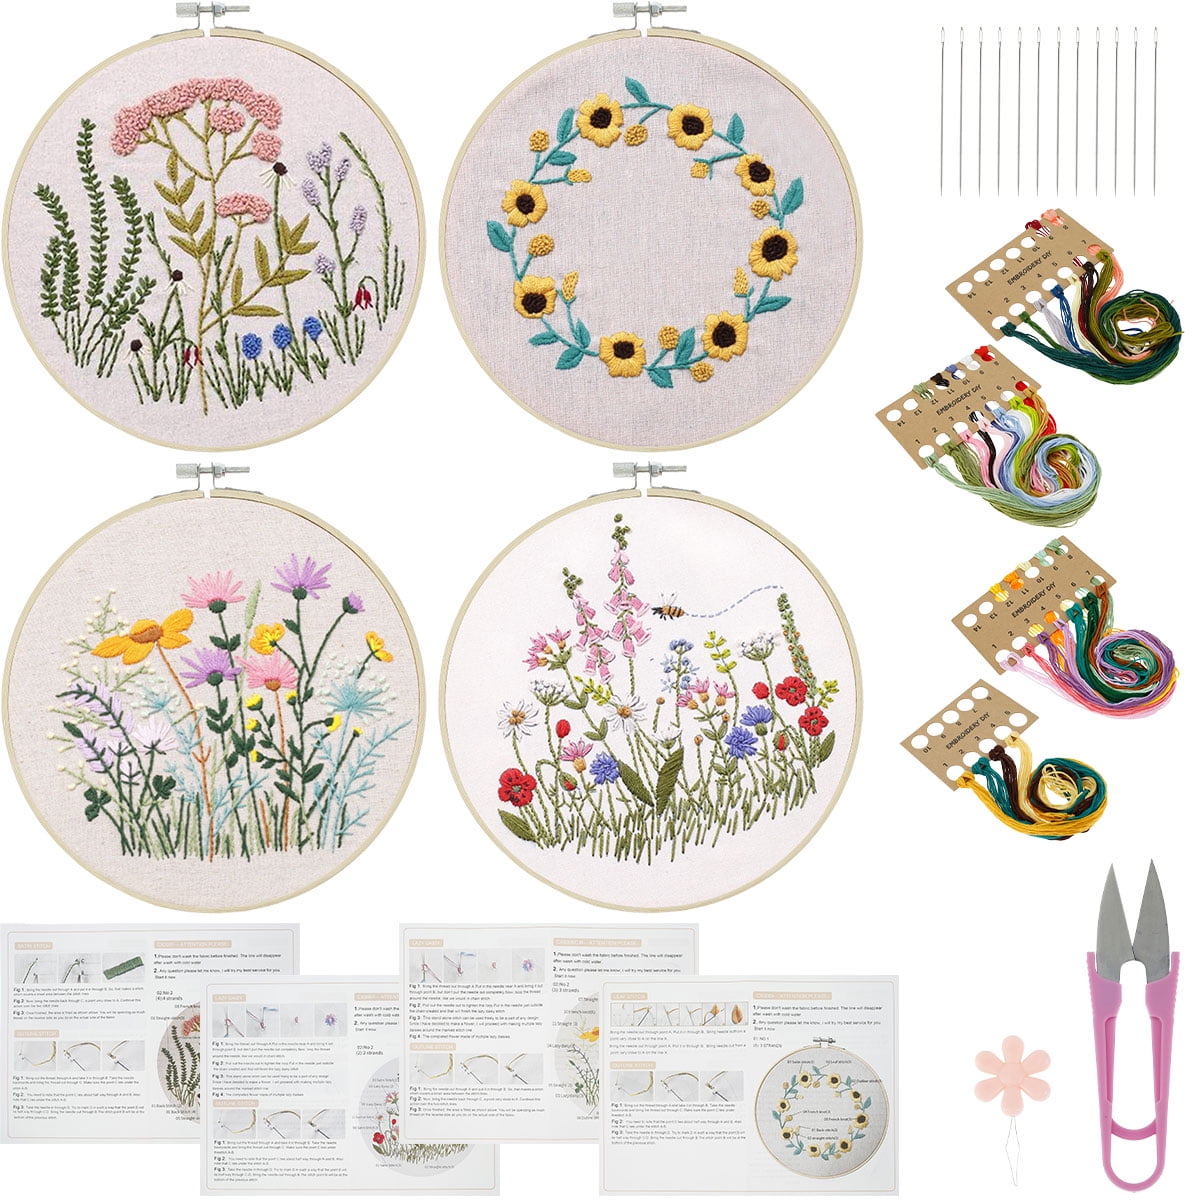 SESAVER Embroidery Starter Kit Hand-made Cross Stitch Kit with Pattern and  Instructions Full Range of Embroidery Kits Embroidery Hoops DIY Embroidery